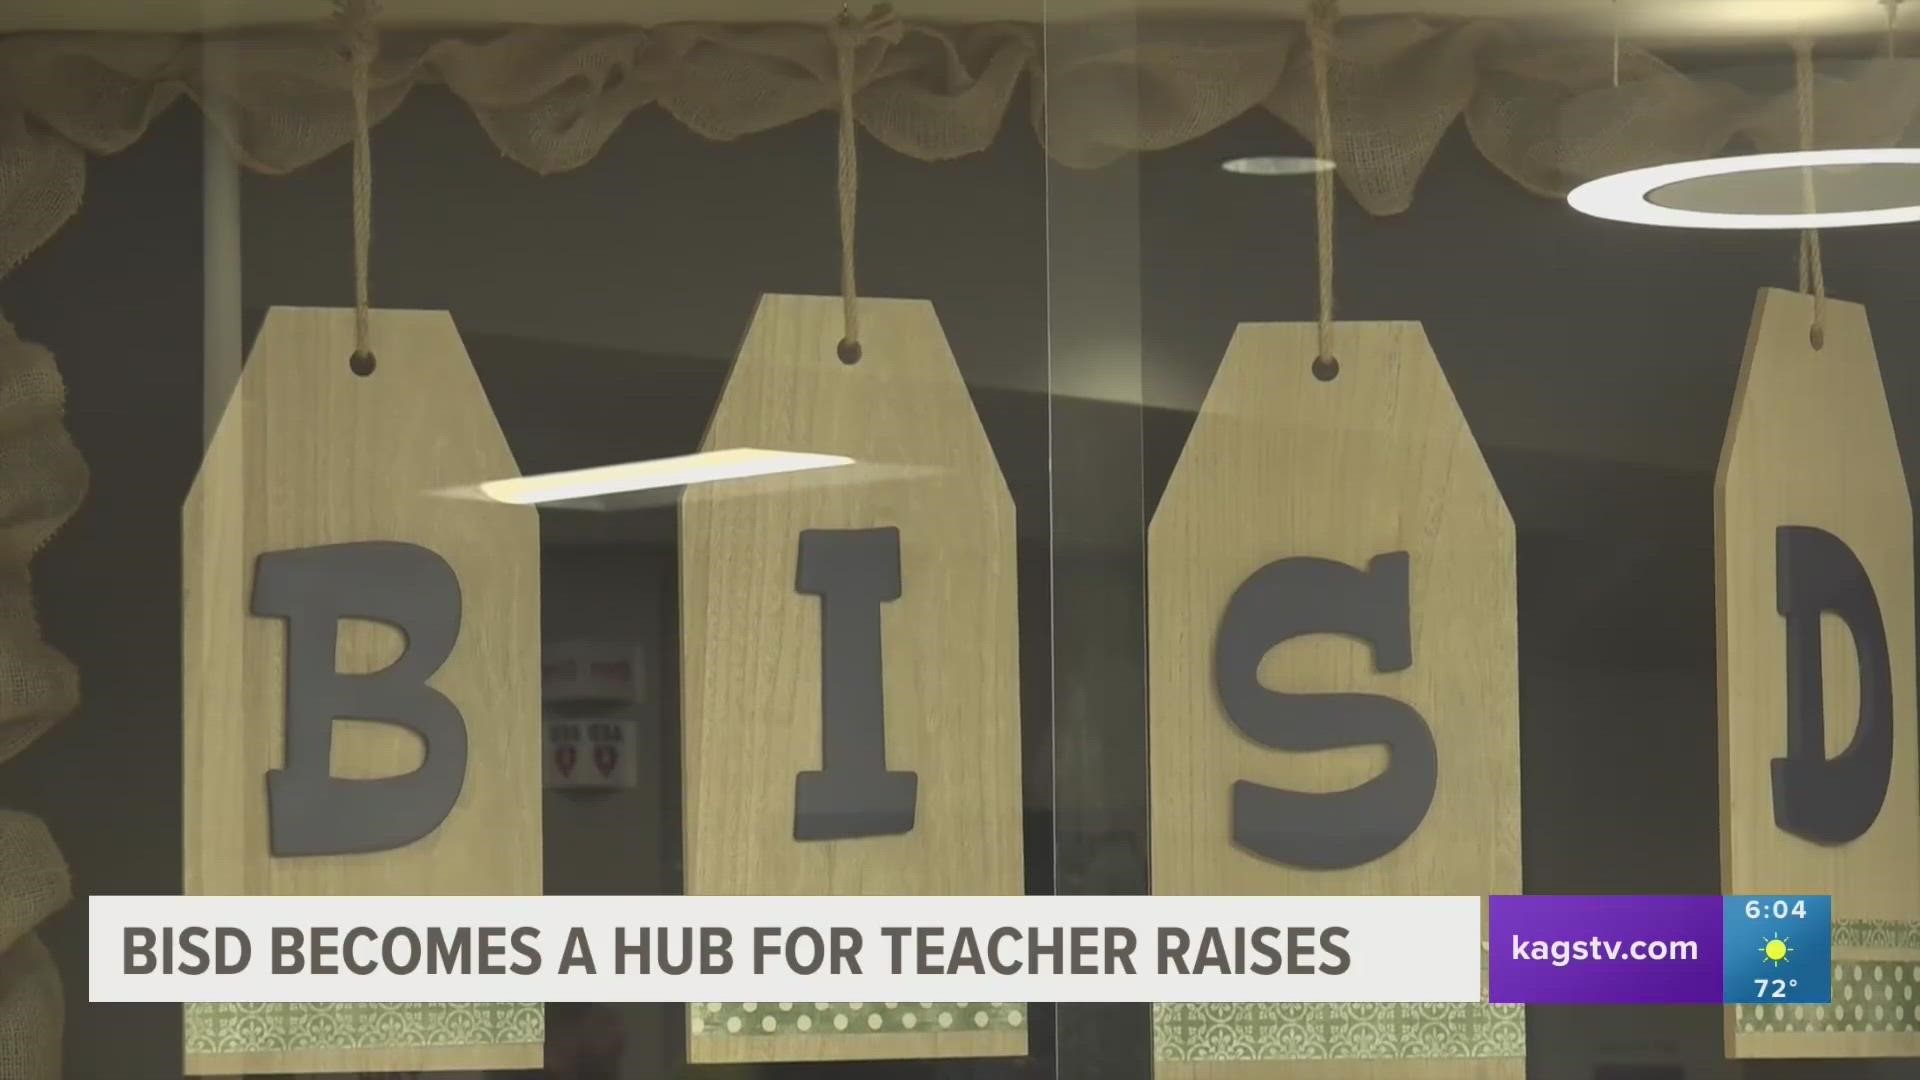 On Wednesday, BISD celebrated the approval of their Teacher Incentive Allotment (TIA) program, which had been in the works for two years.